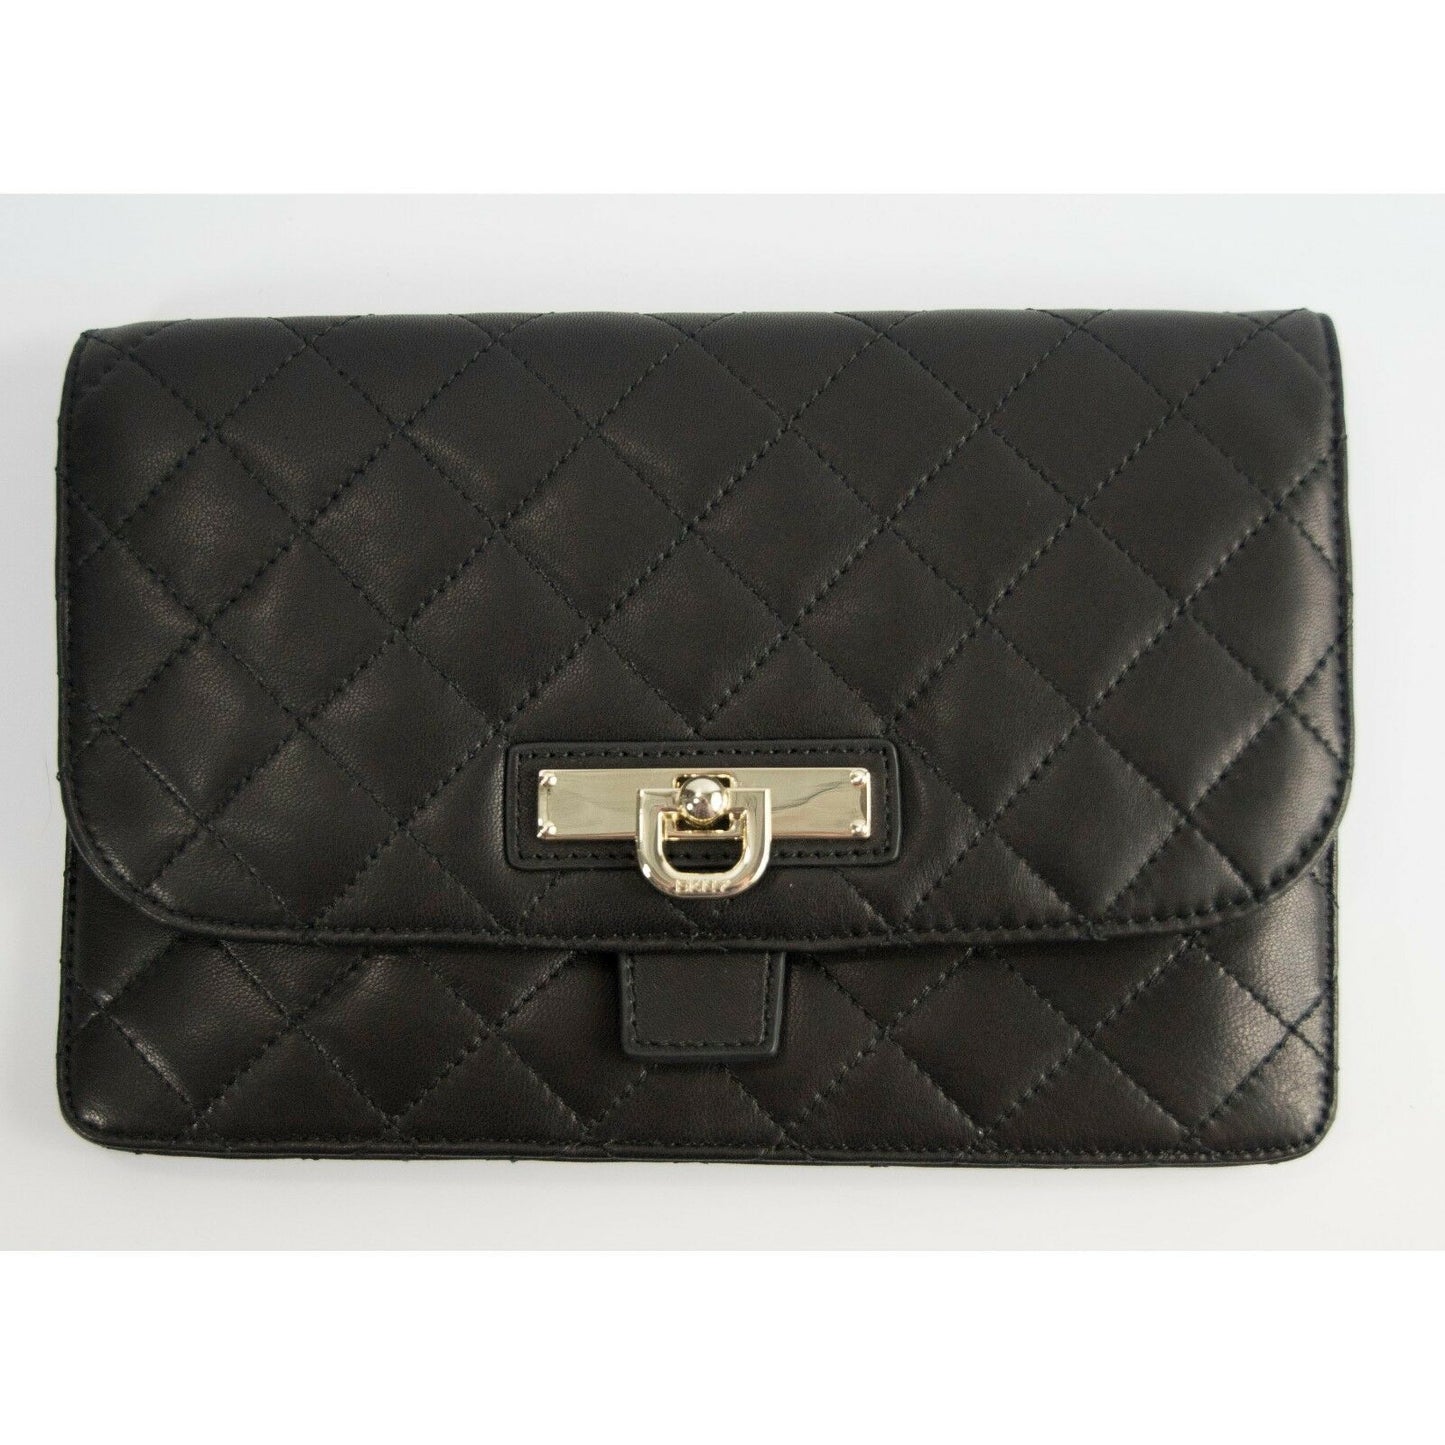 DKNY Quilted Nappa Black Leather Mini iPad Tablet Kindle Sleeve Clutch NWT